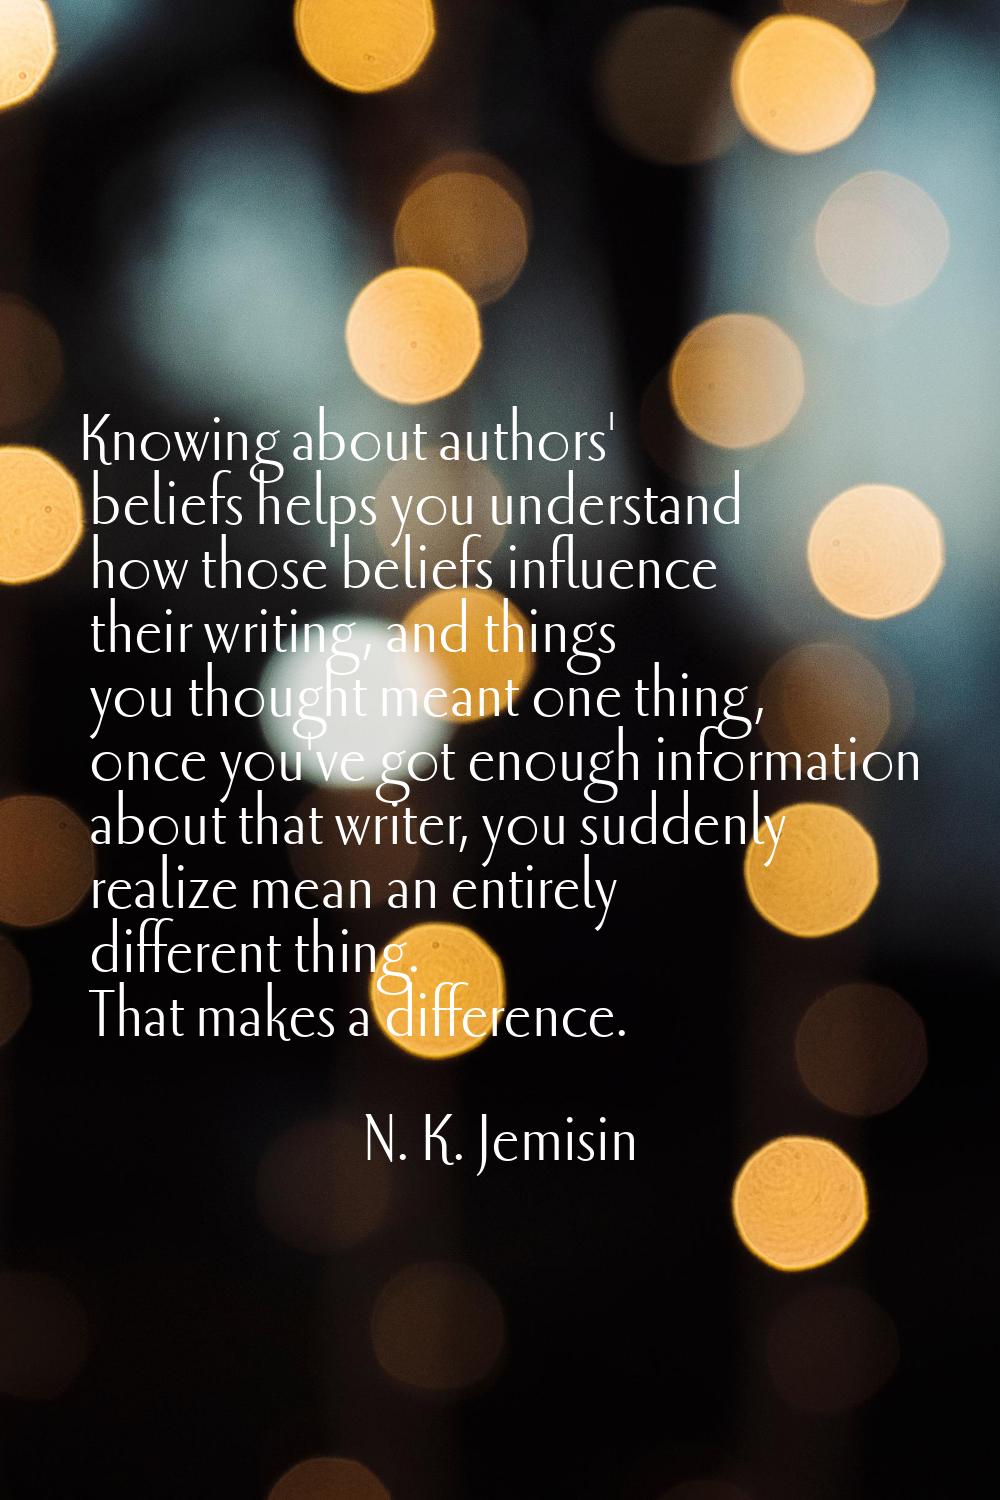 Knowing about authors' beliefs helps you understand how those beliefs influence their writing, and 